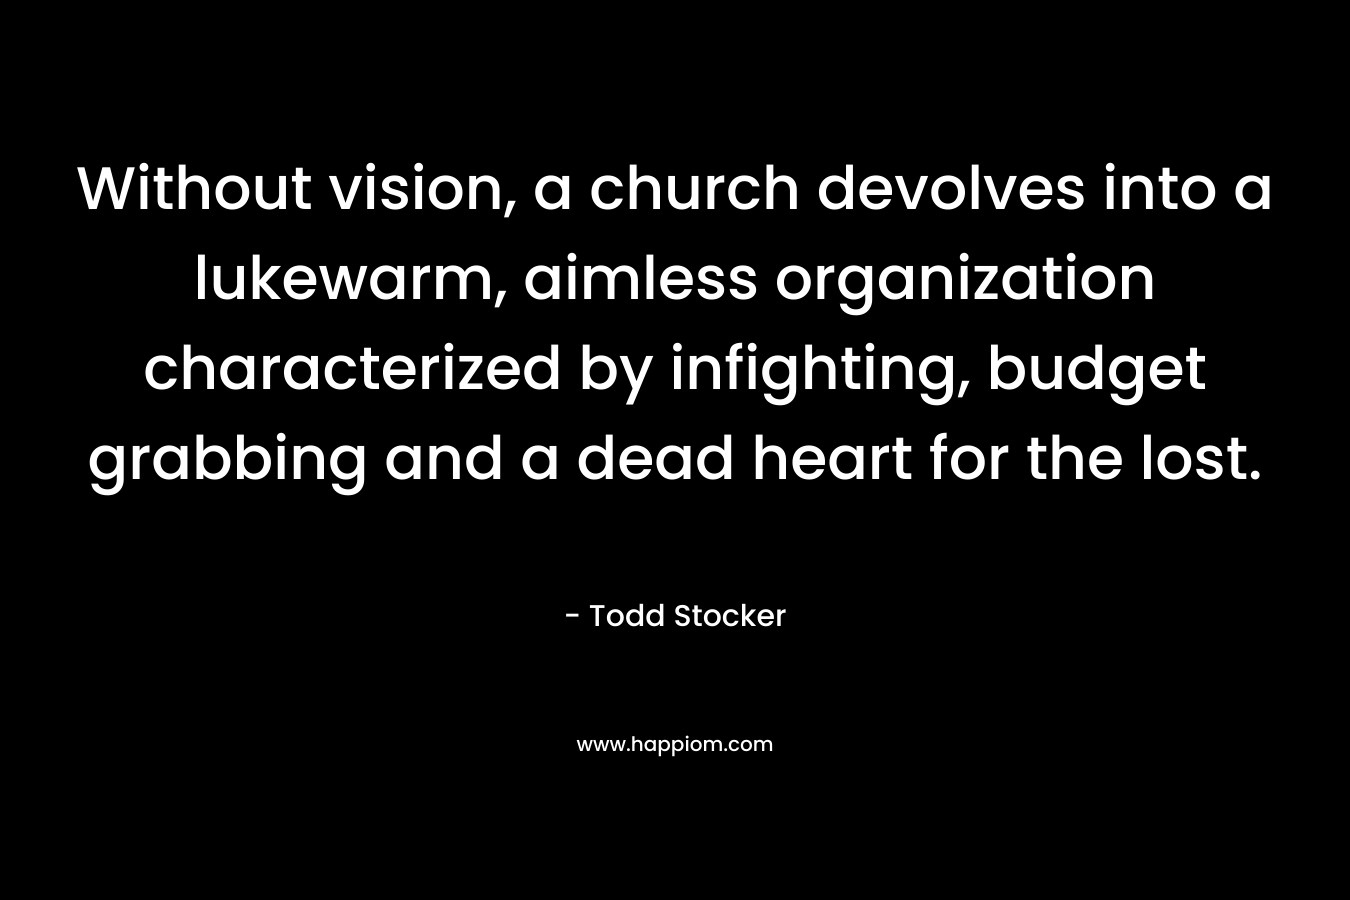 Without vision, a church devolves into a lukewarm, aimless organization characterized by infighting, budget grabbing and a dead heart for the lost. – Todd Stocker